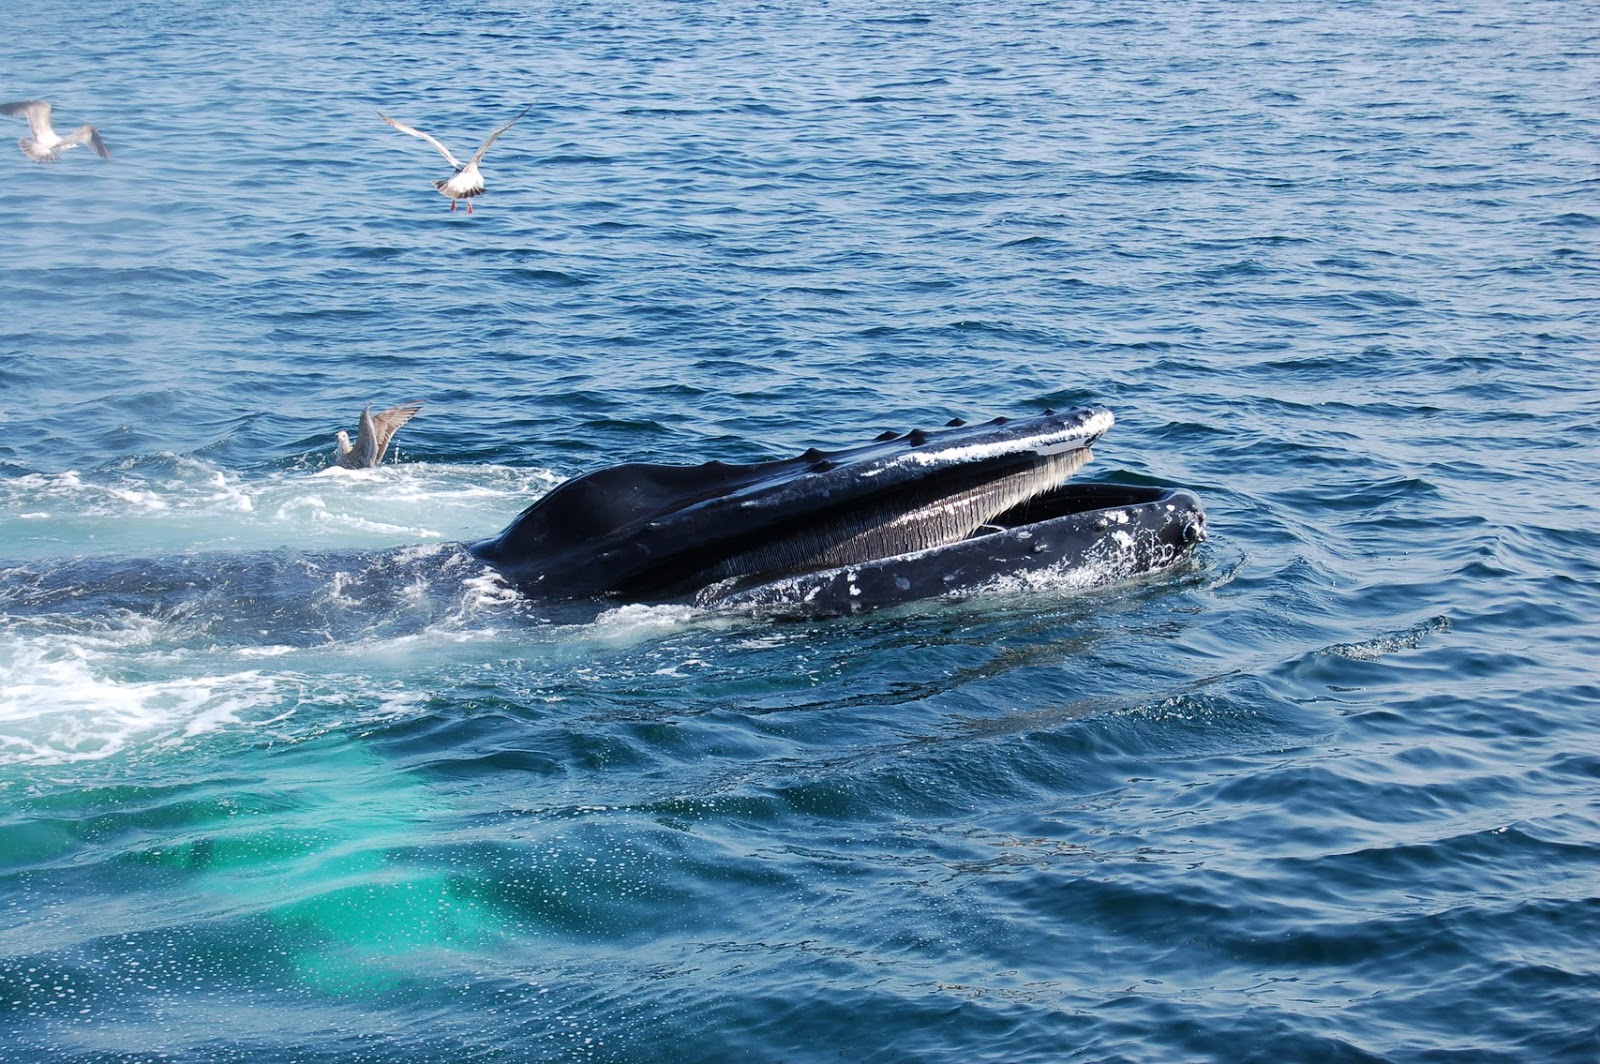 Humpback whale making bubbles in the water.